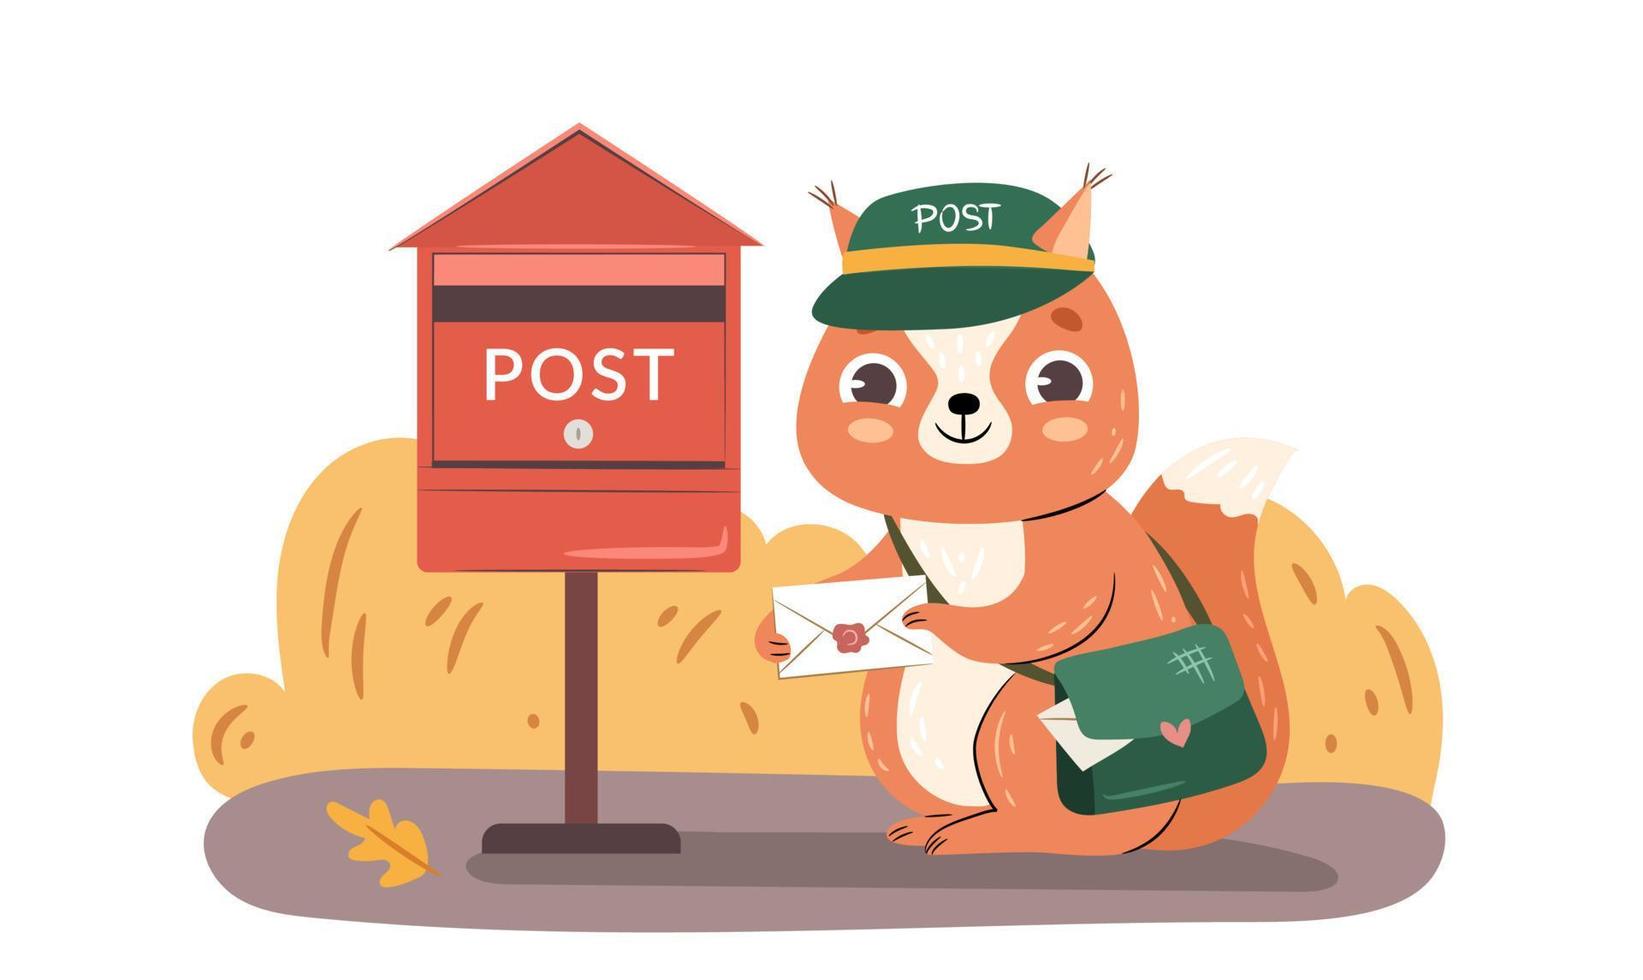 An illustrated squirrel delivering mail.